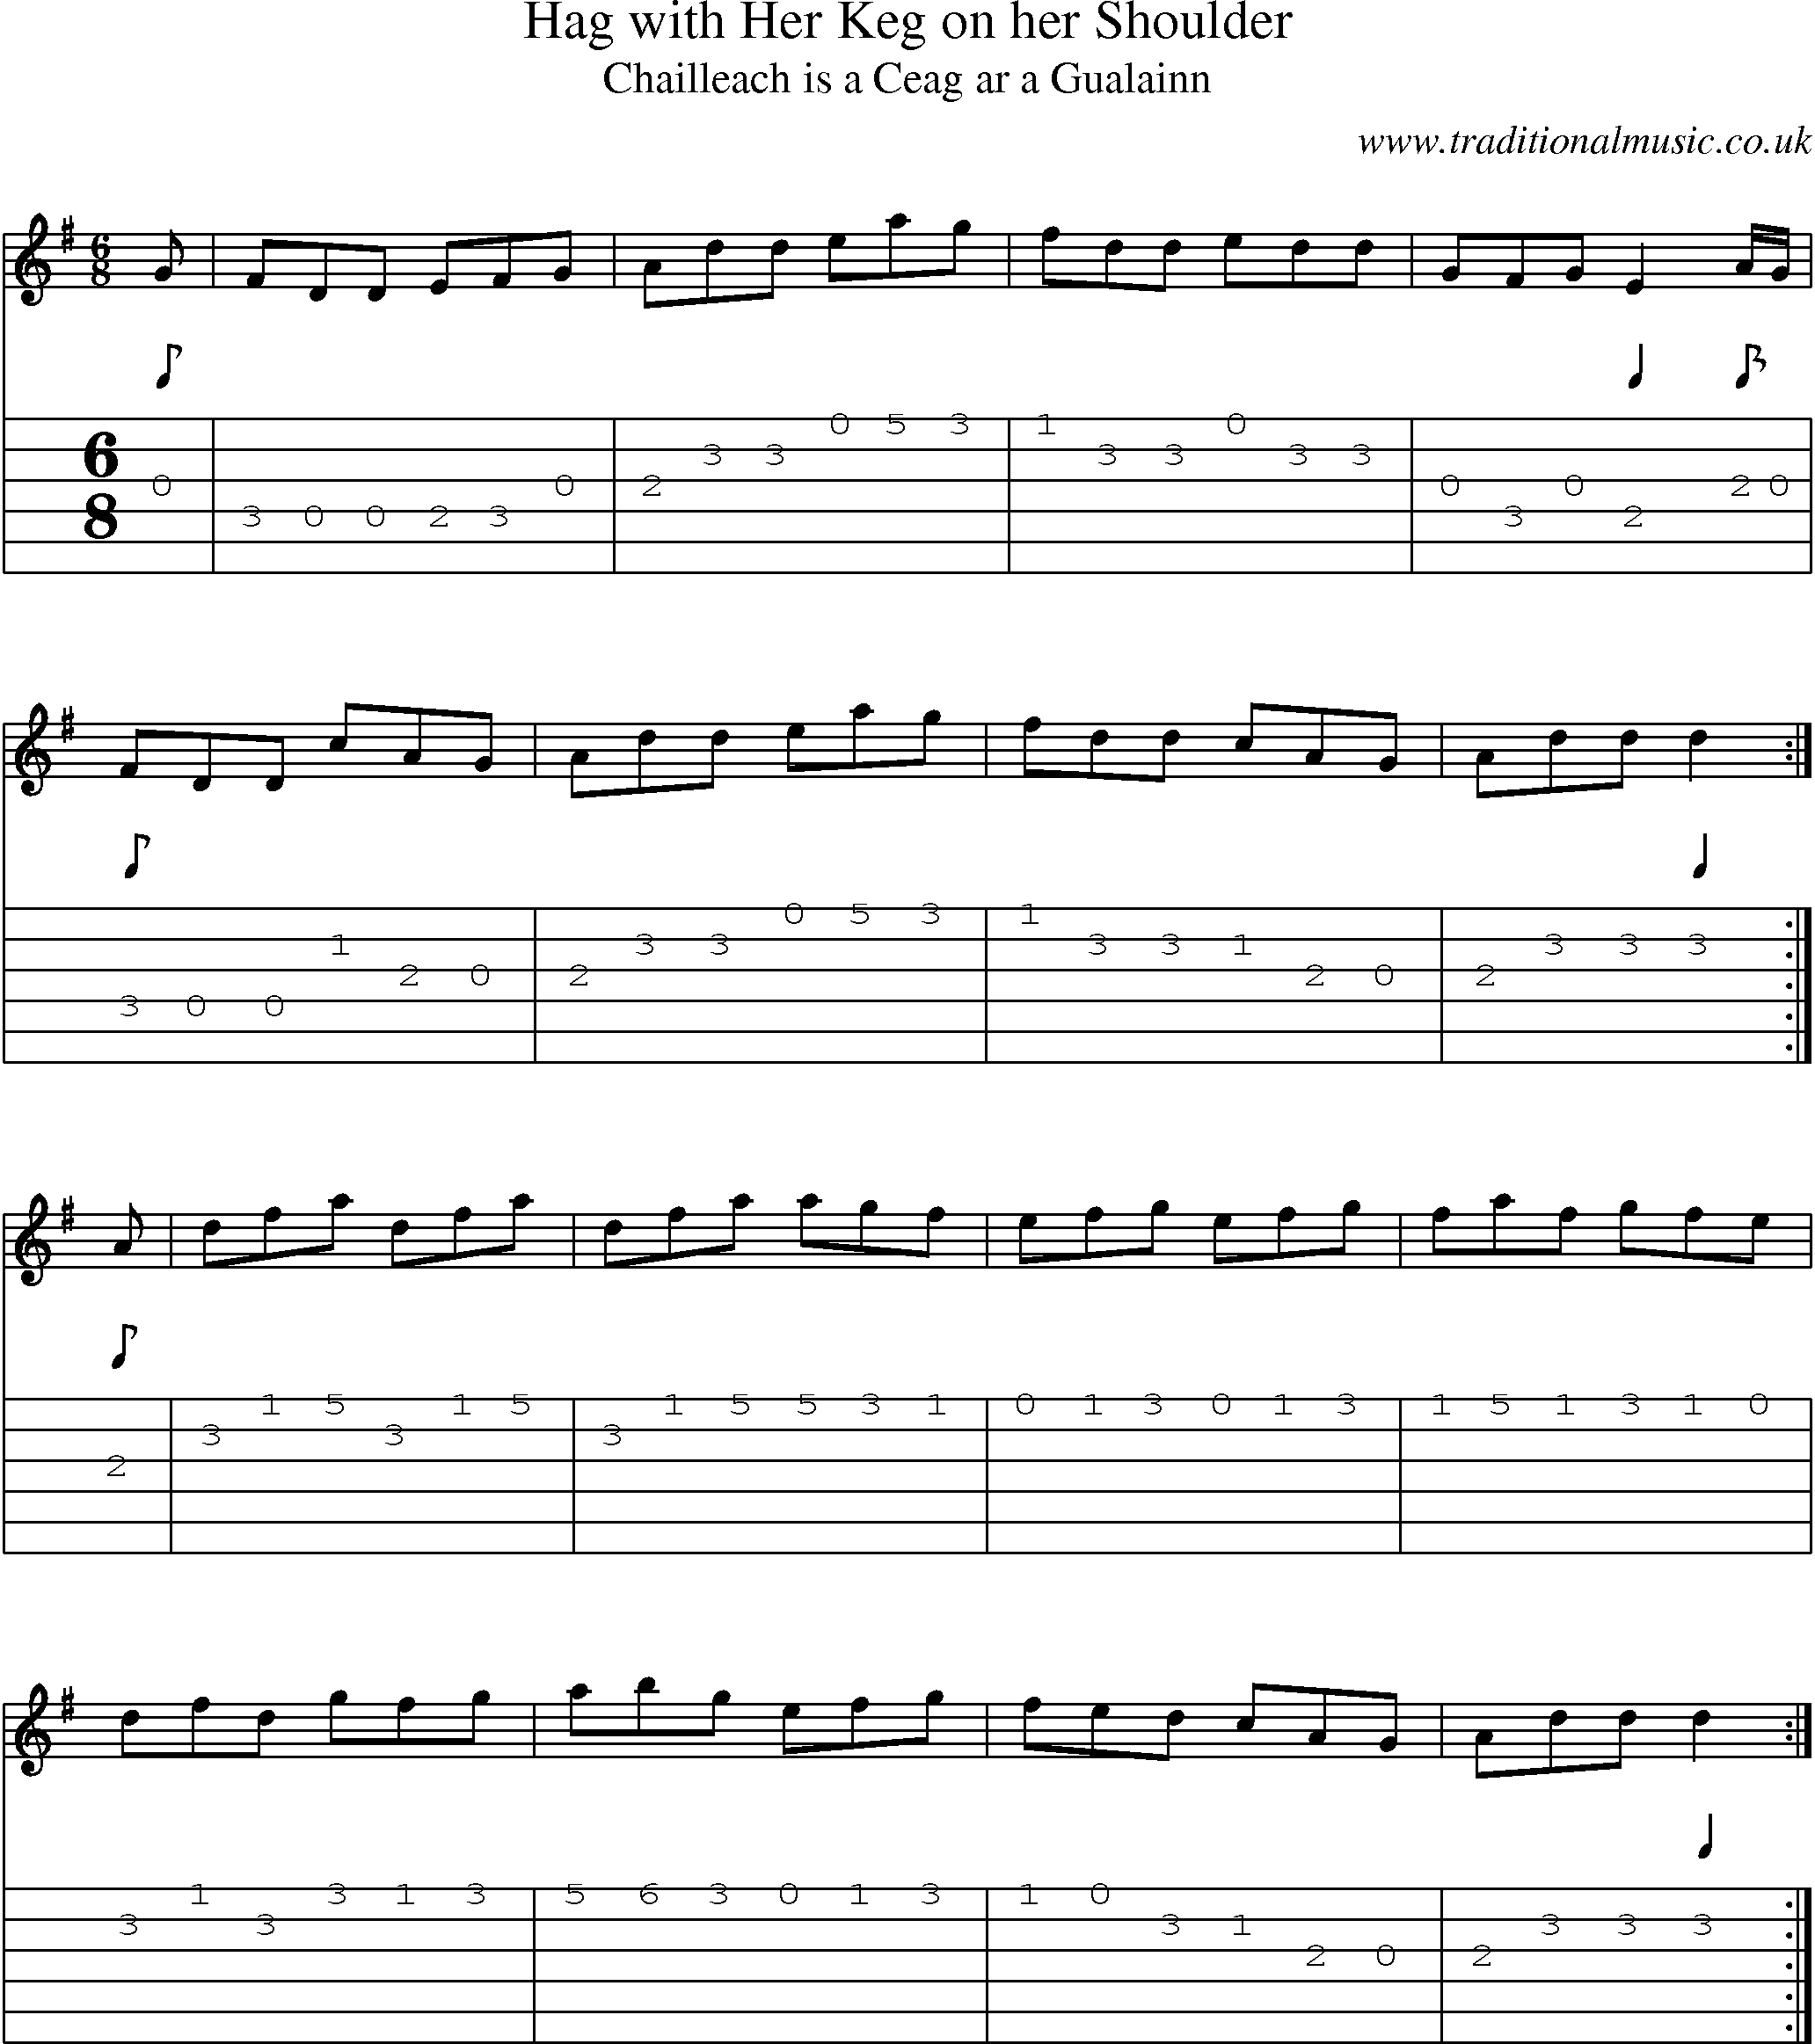 Music Score and Guitar Tabs for Hag With Her Keg On Her Shoulder